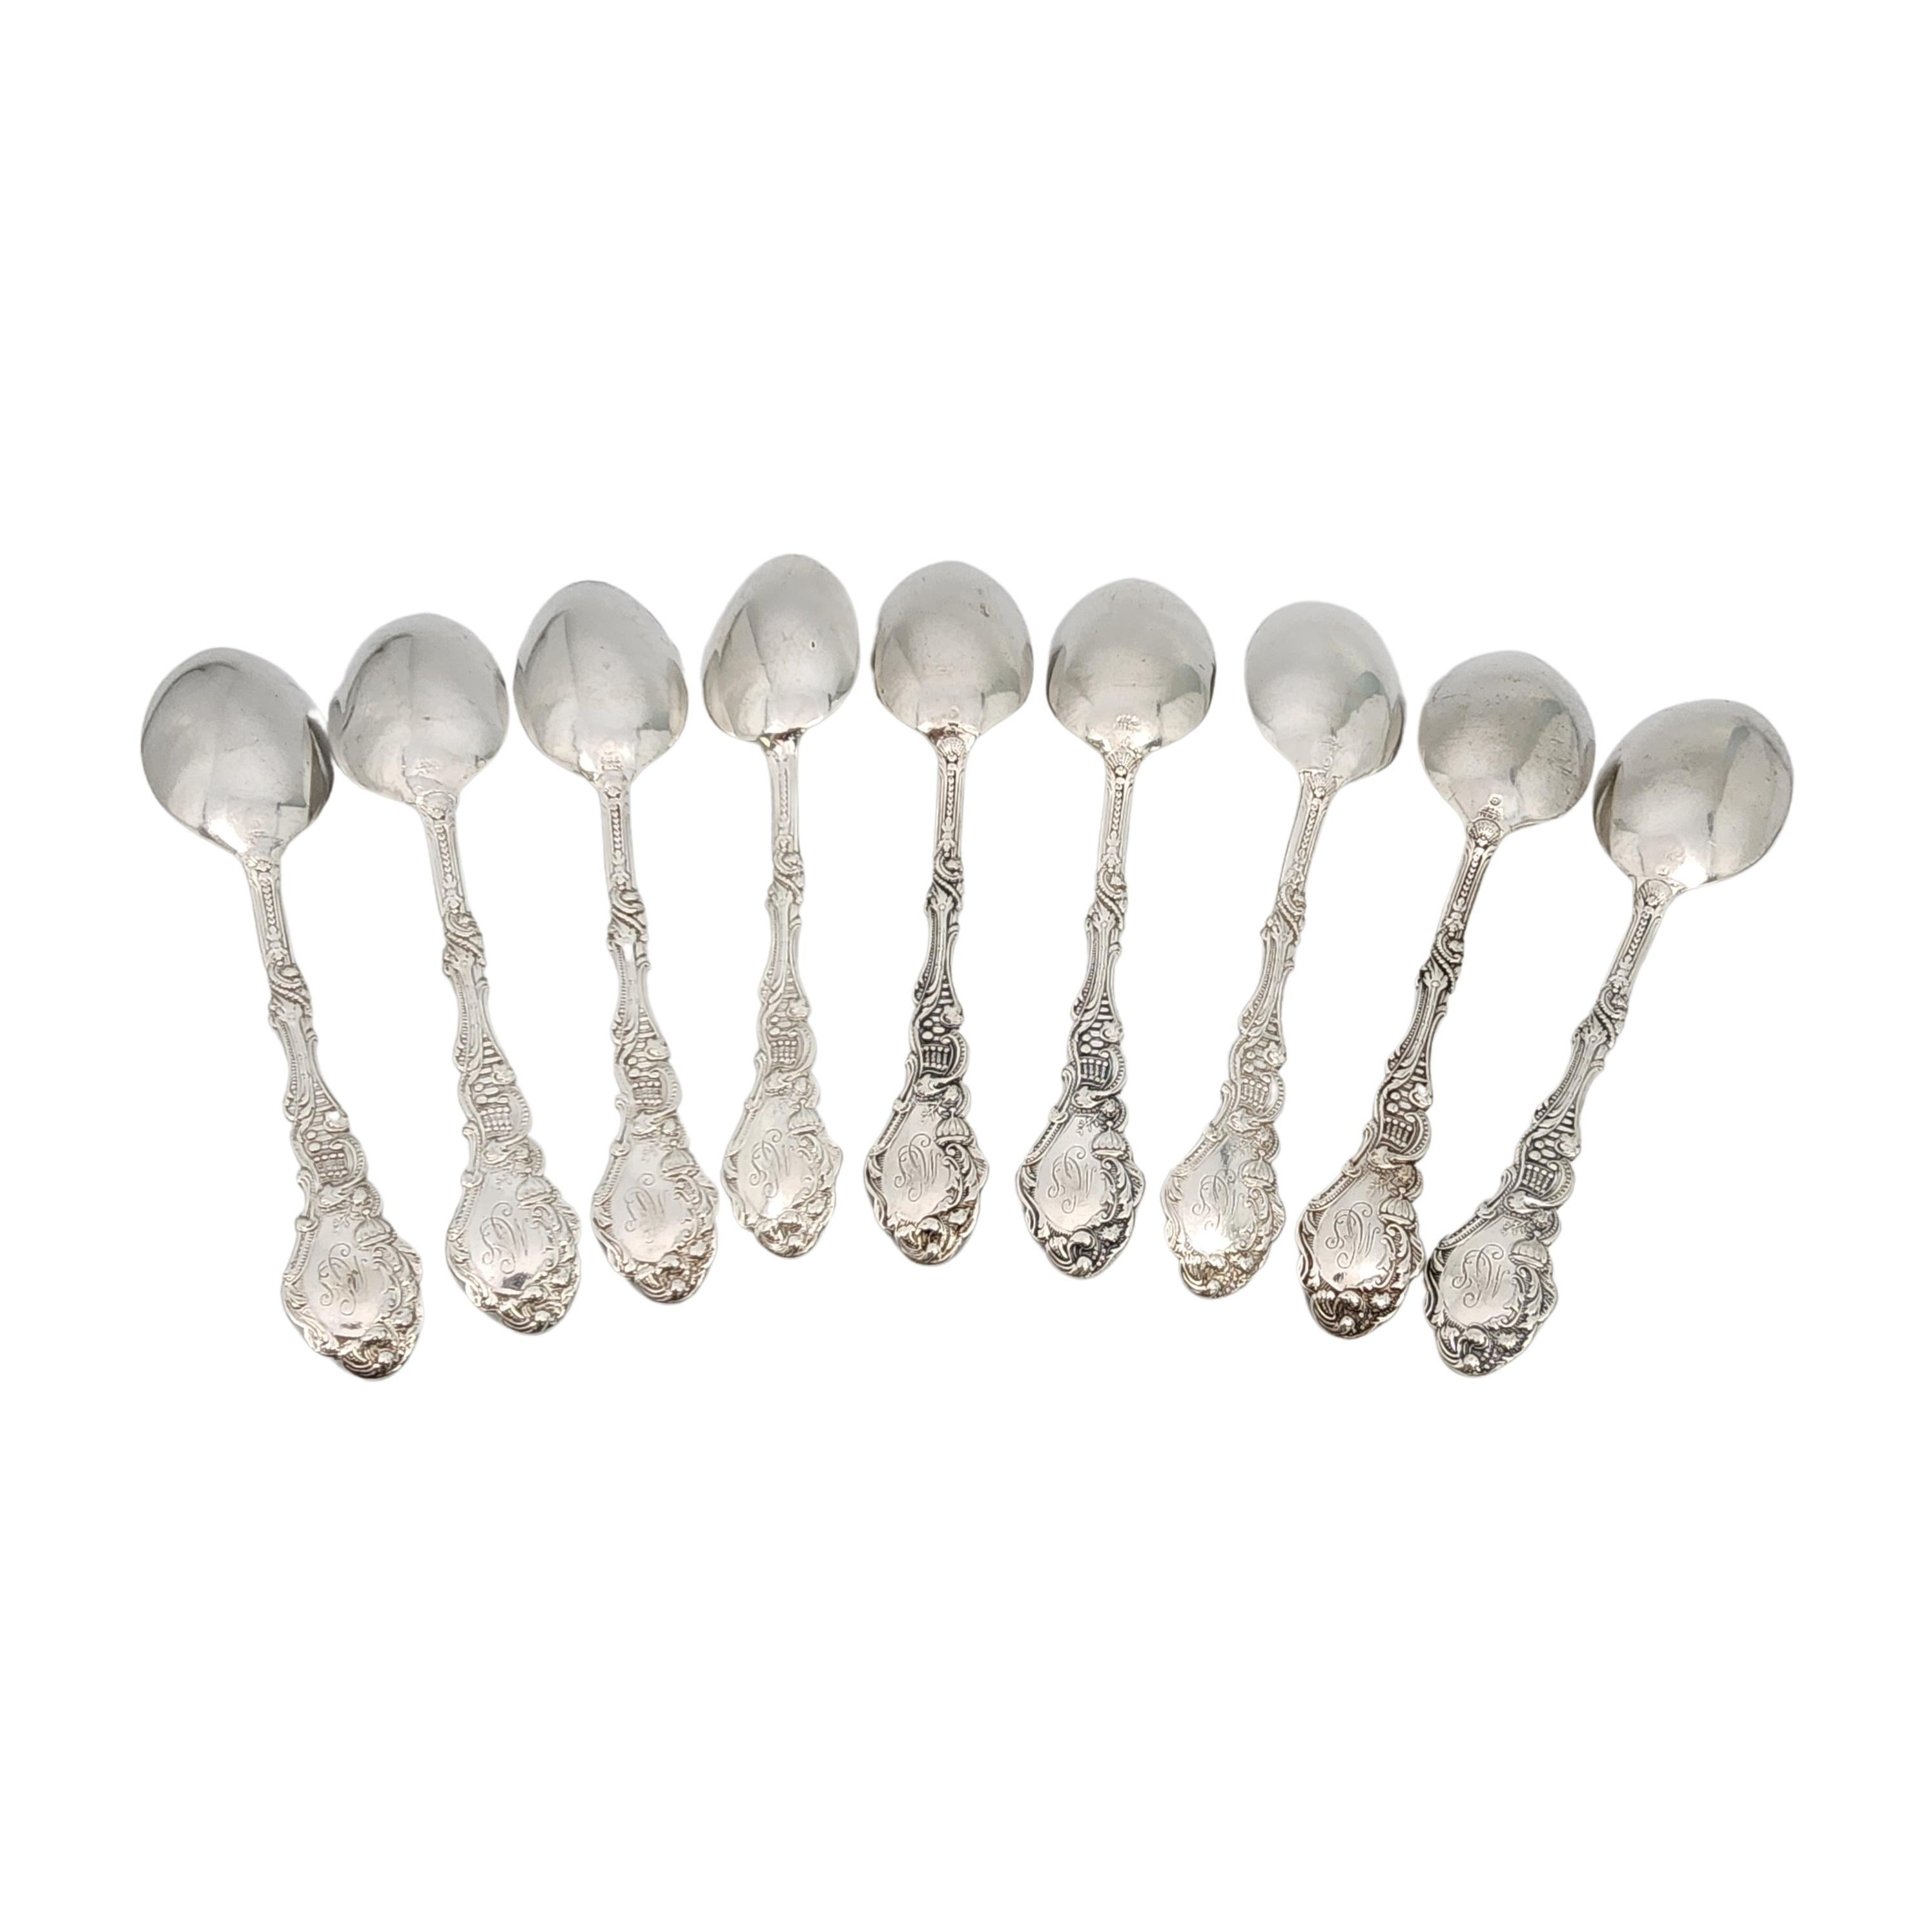 Set of 9 sterling silver teaspoons in the Versailles pattern by Gorham.

Monogram appears to be MSJ (see photo).

Gorham's Versailles is a multi motif pattern designed by Antoine Heller in 1885. Named for the Palace of Versailles, the pattern